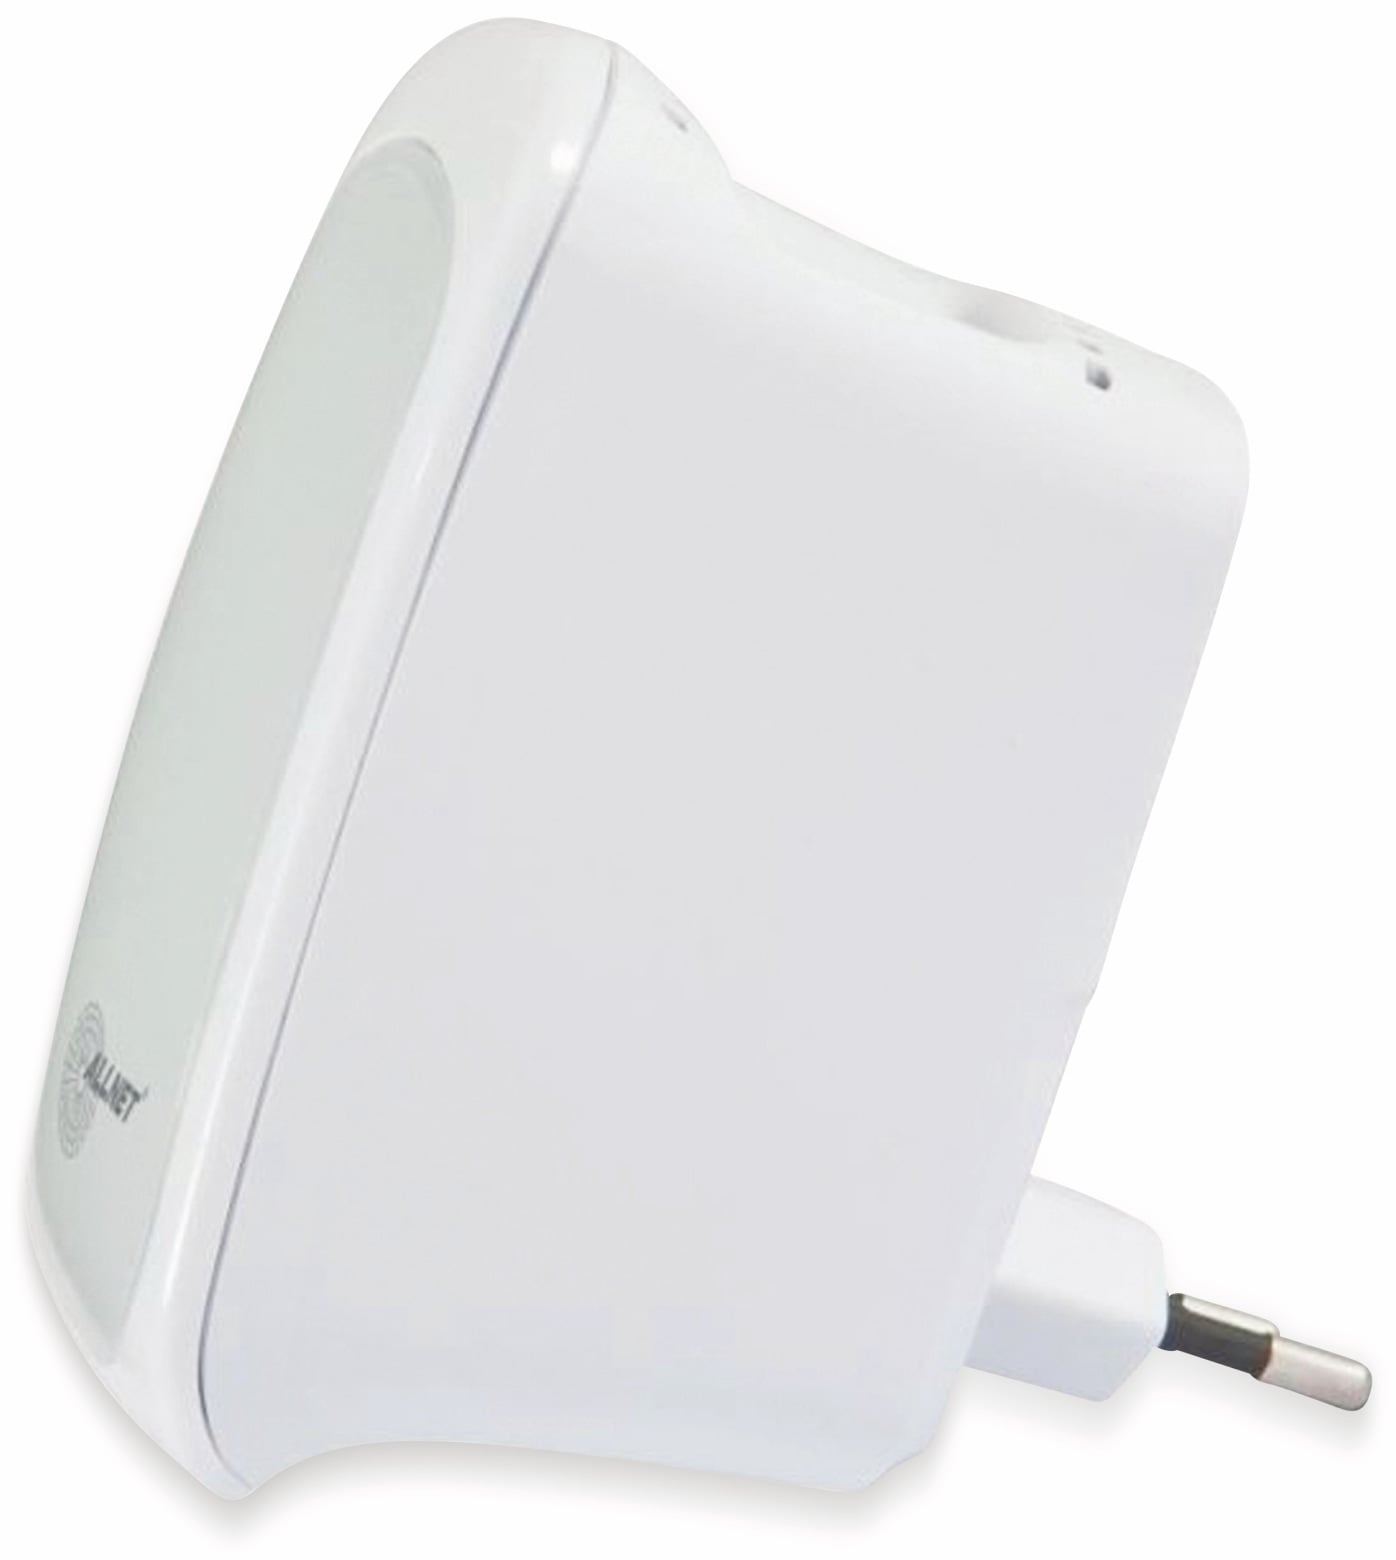 ALLNET WLAN-Repeater ALL0238RD, Dual-Band, 300 MBit/s